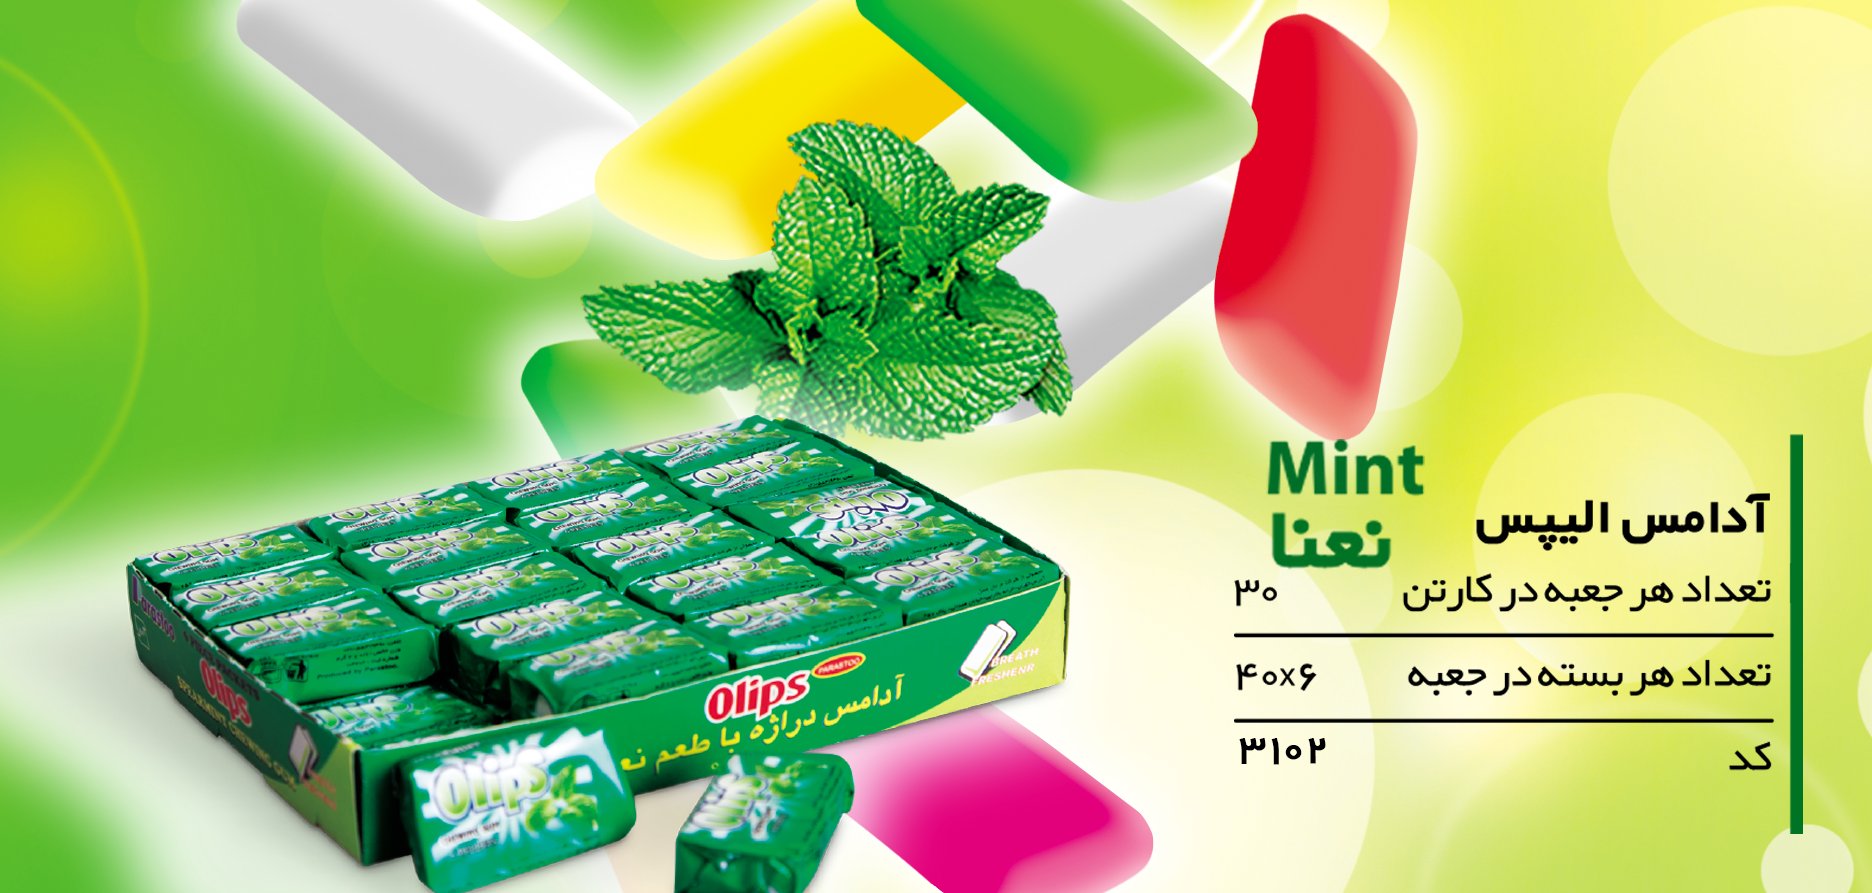 Mint Olips Chewing gum